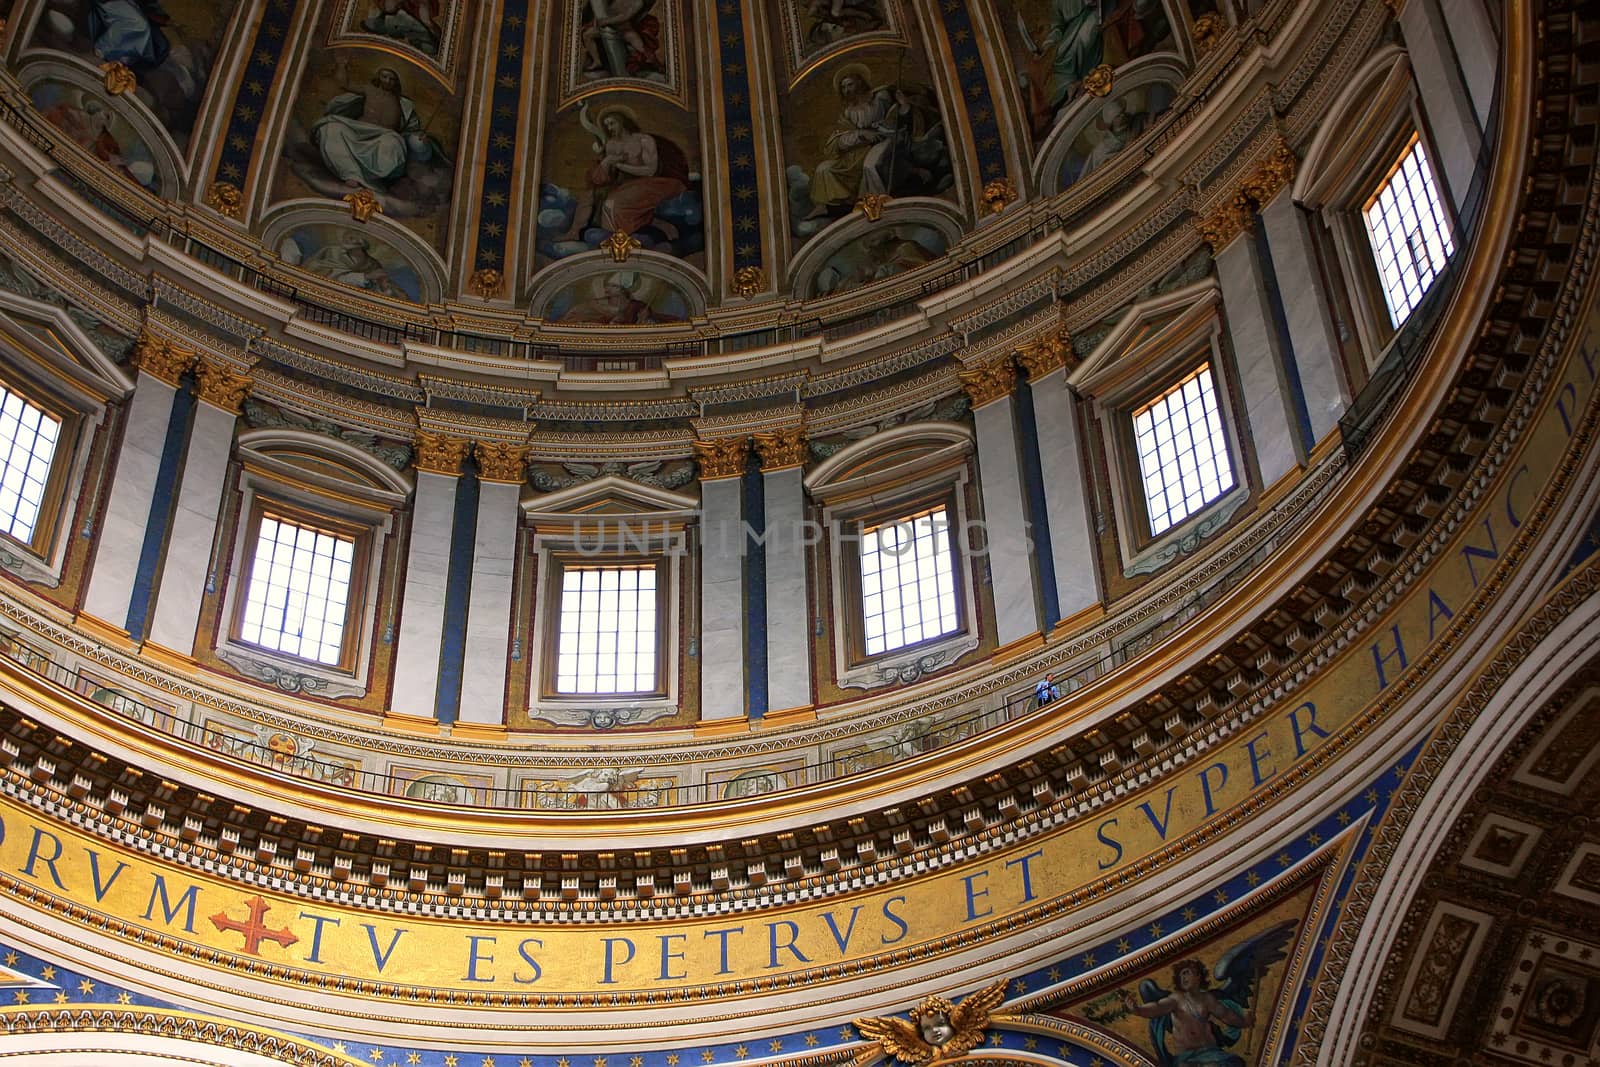 Detail of a dome, Saint Peters Basilica, Vatican City, Rome by donya_nedomam